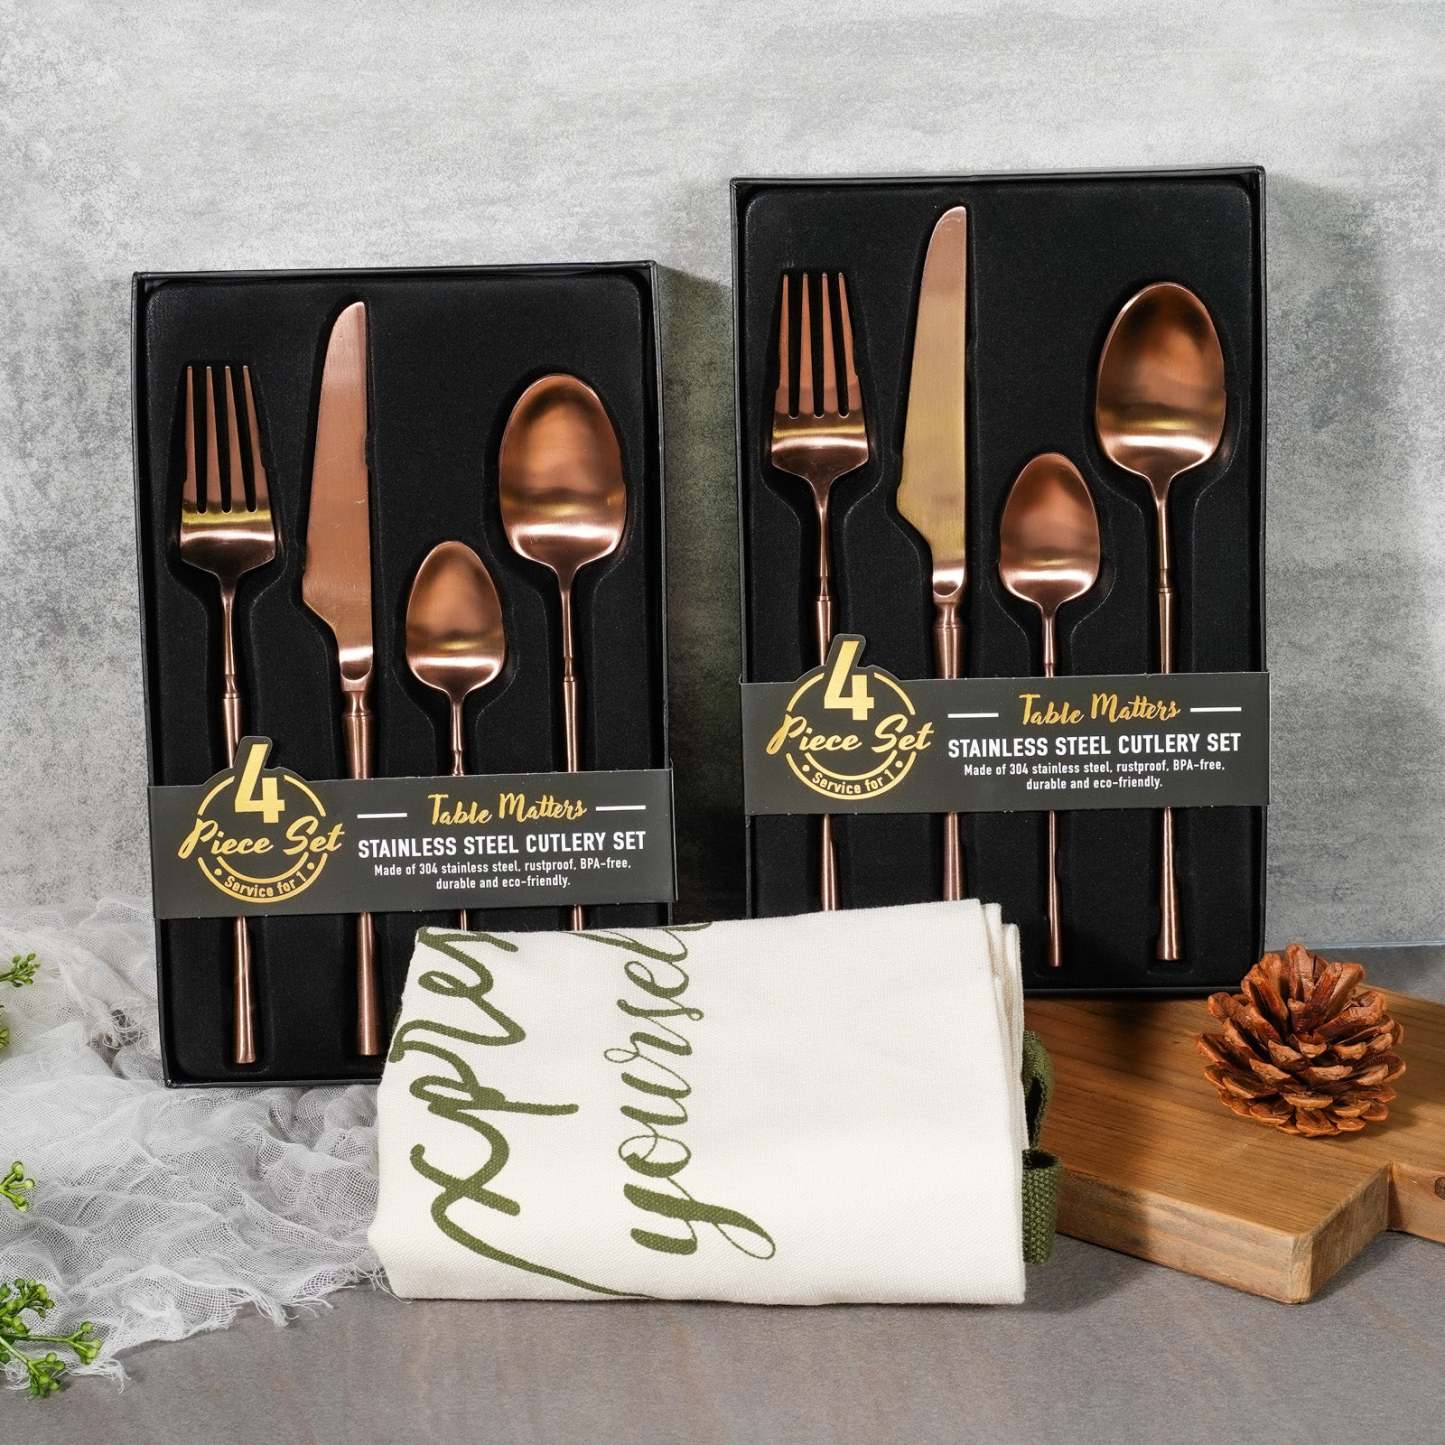 Bundle Deal - Parisian 4PC Stainless Steel Cutlery Set - Rose Gold (Set of 2)